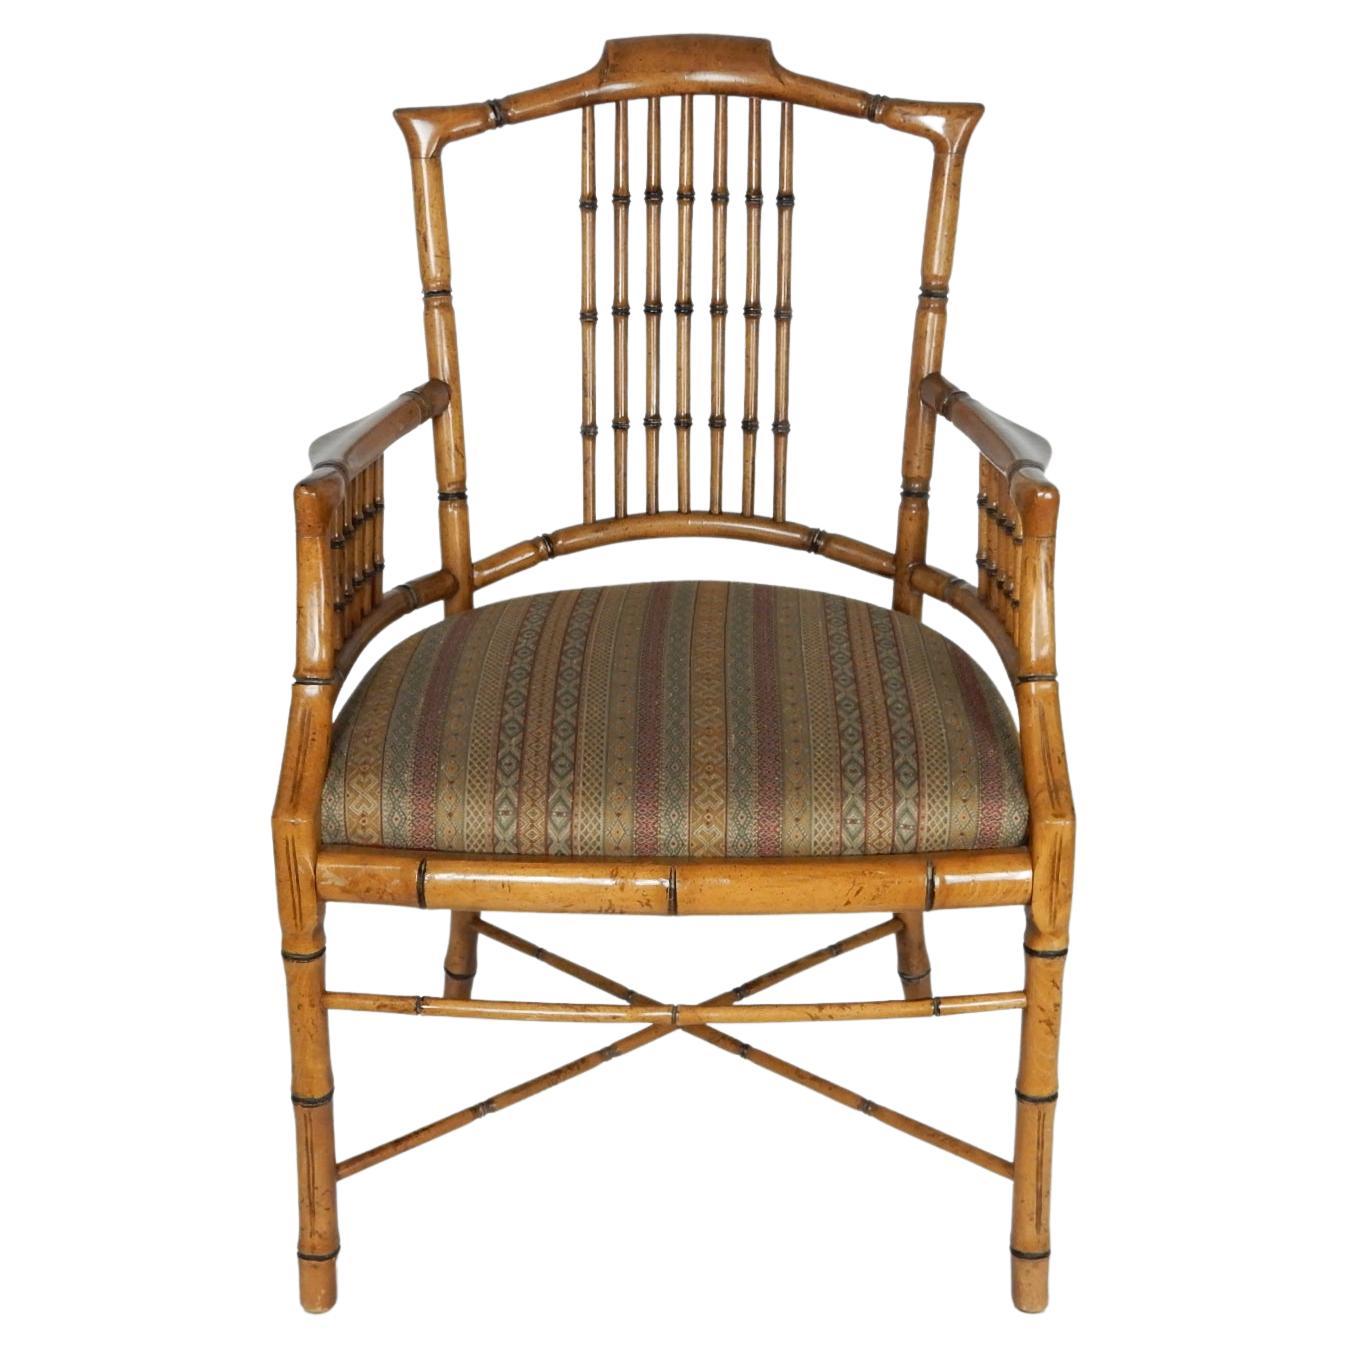 A pair of arm chairs attributed to Baker Furniture CO., circa 1960s. 
This is a seldom seen version with the tall back and wide arm rests.
Reupholstered at one time with striped pattern fabric.
These have been cared for over the years showing no